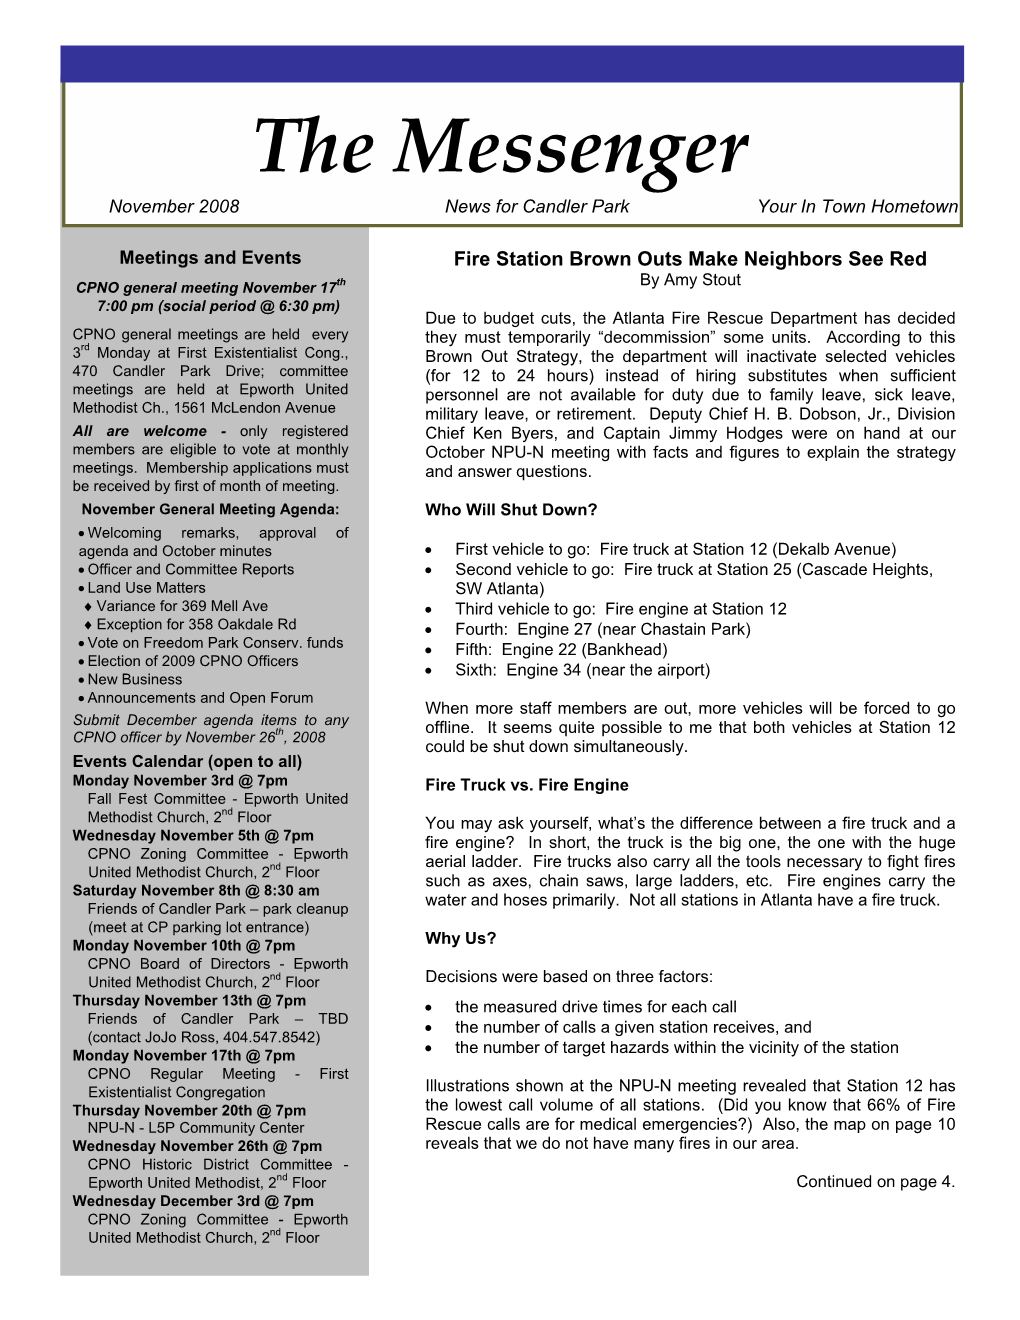 The Messenger November 2008 News for Candler Park Your in Town Hometown